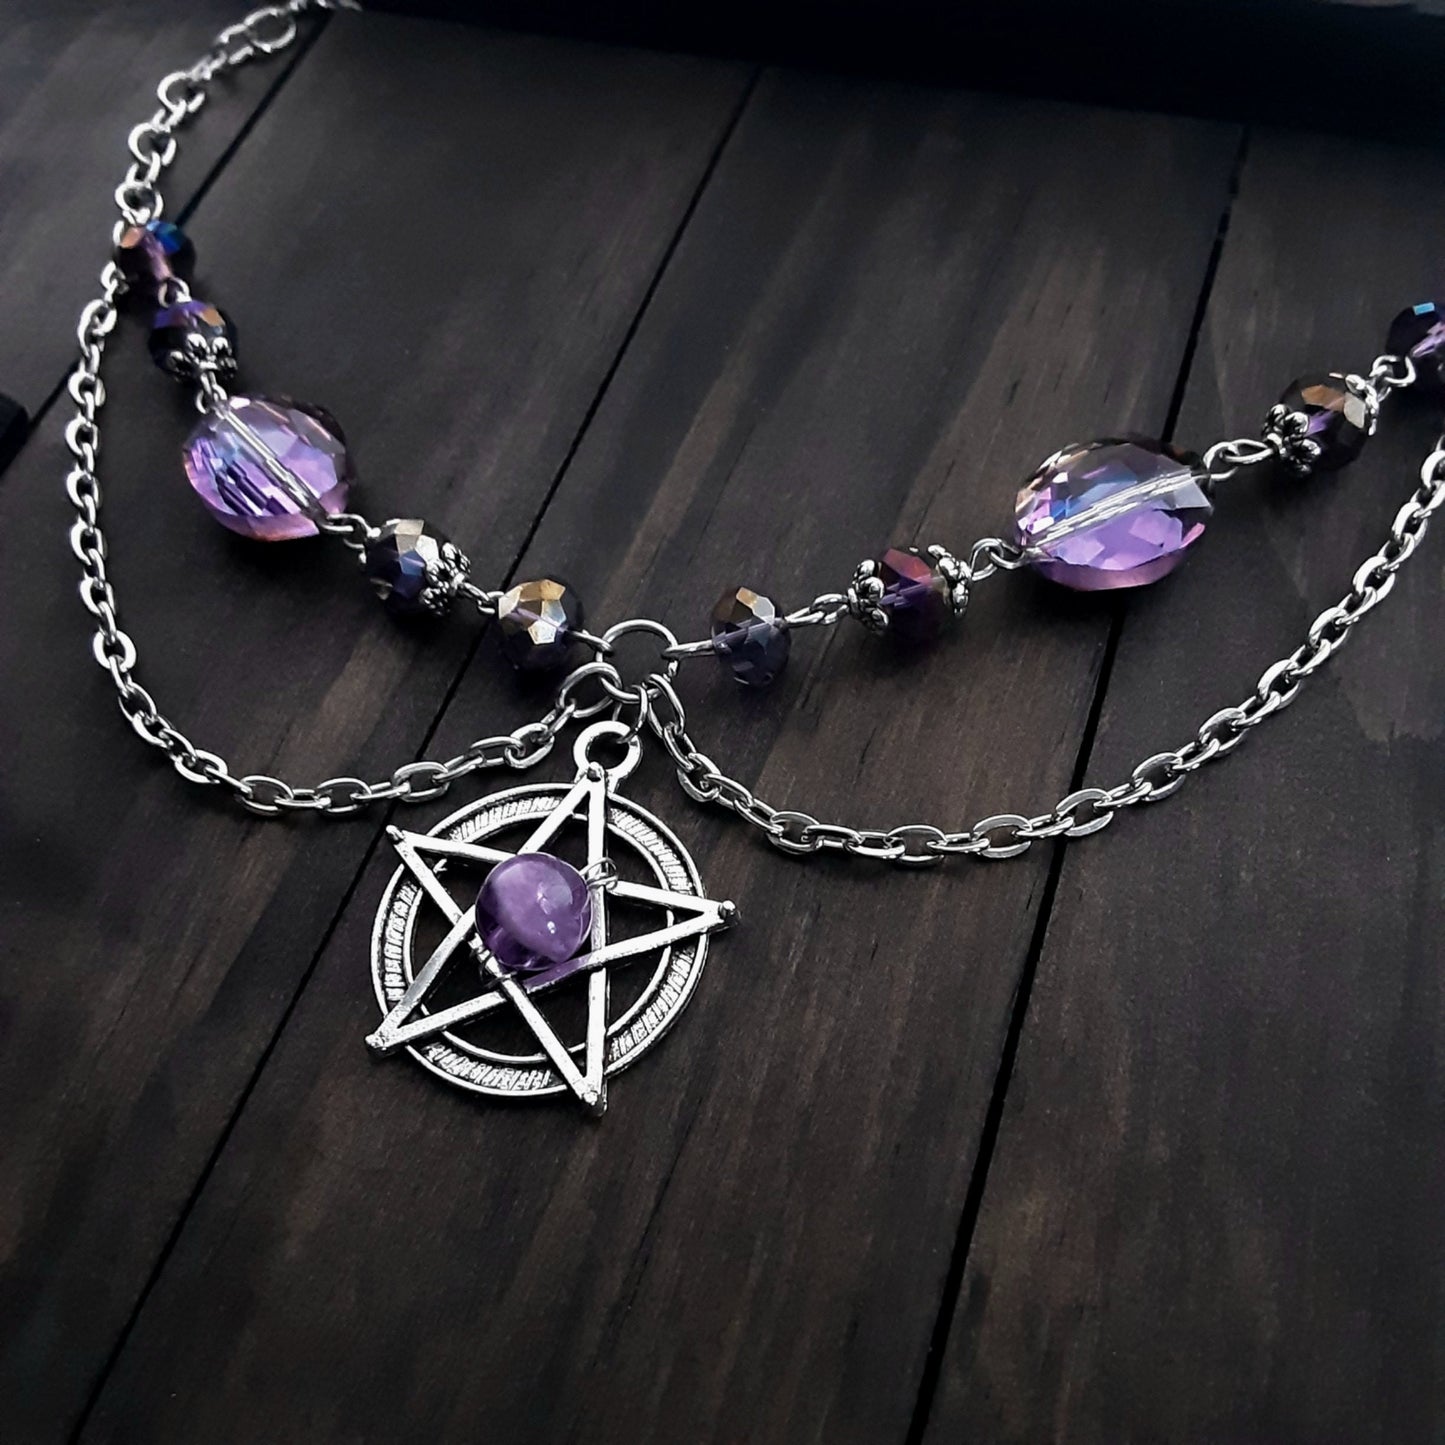 Pentacle Necklace with Amethyst and purple crystal Adjustable plus size choker necklace Pagan Jewelry